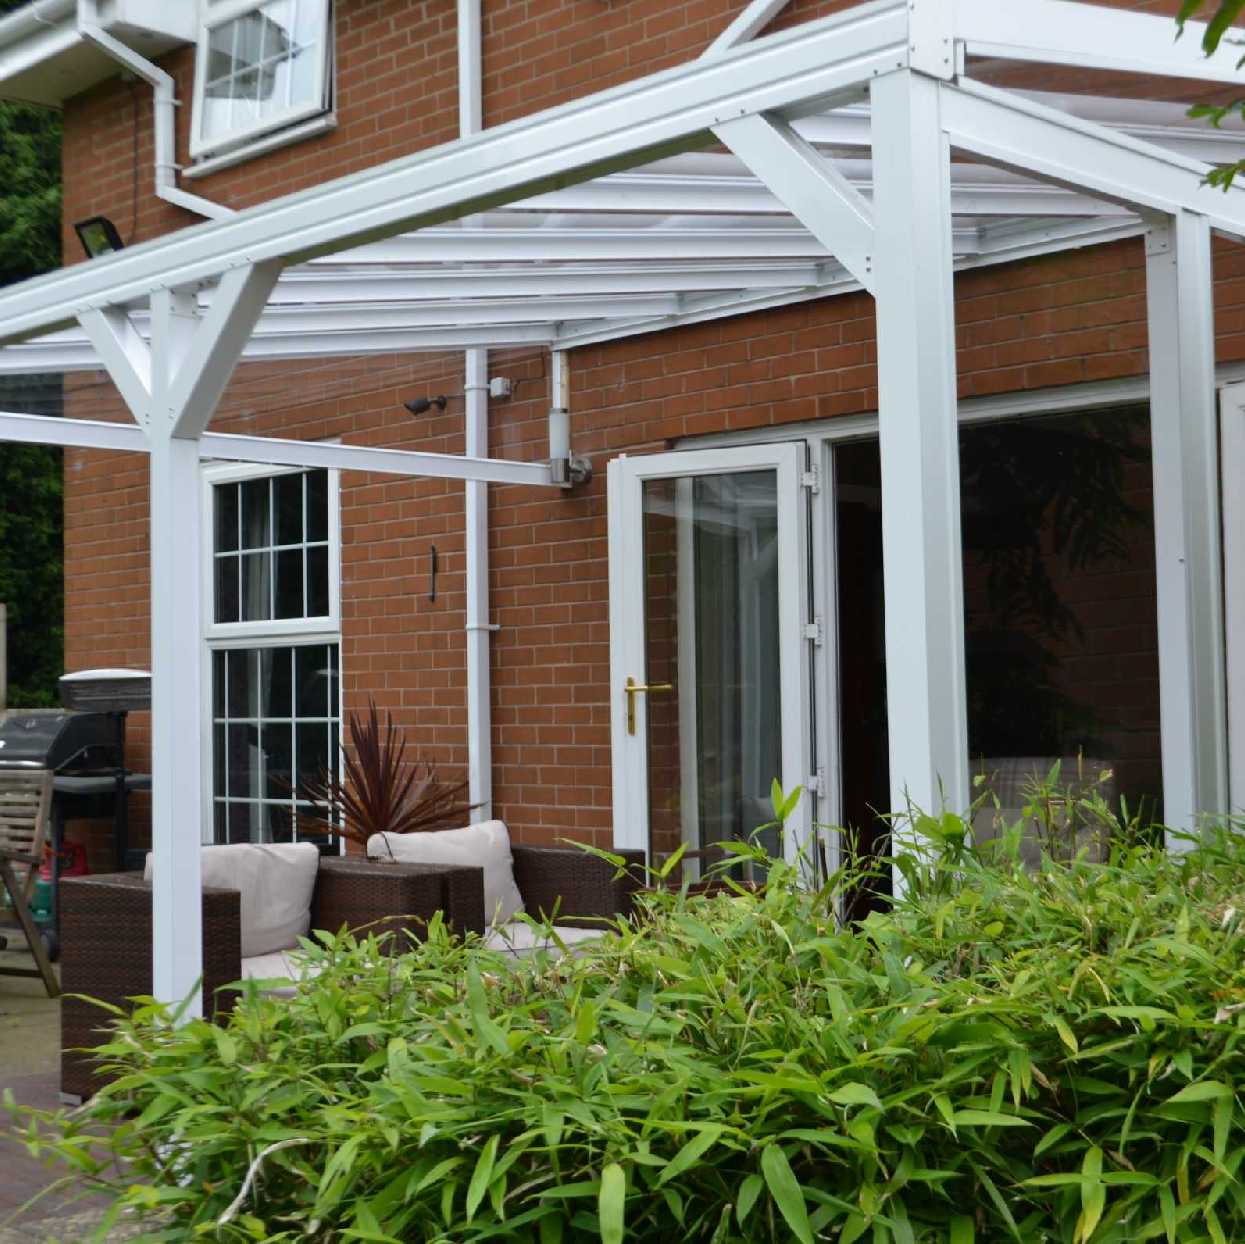 Omega Smart Lean-To Canopy, White UNGLAZED for 6mm Glazing - 8.4m (W) x 1.5m (P), (4) Supporting Posts from Omega Build